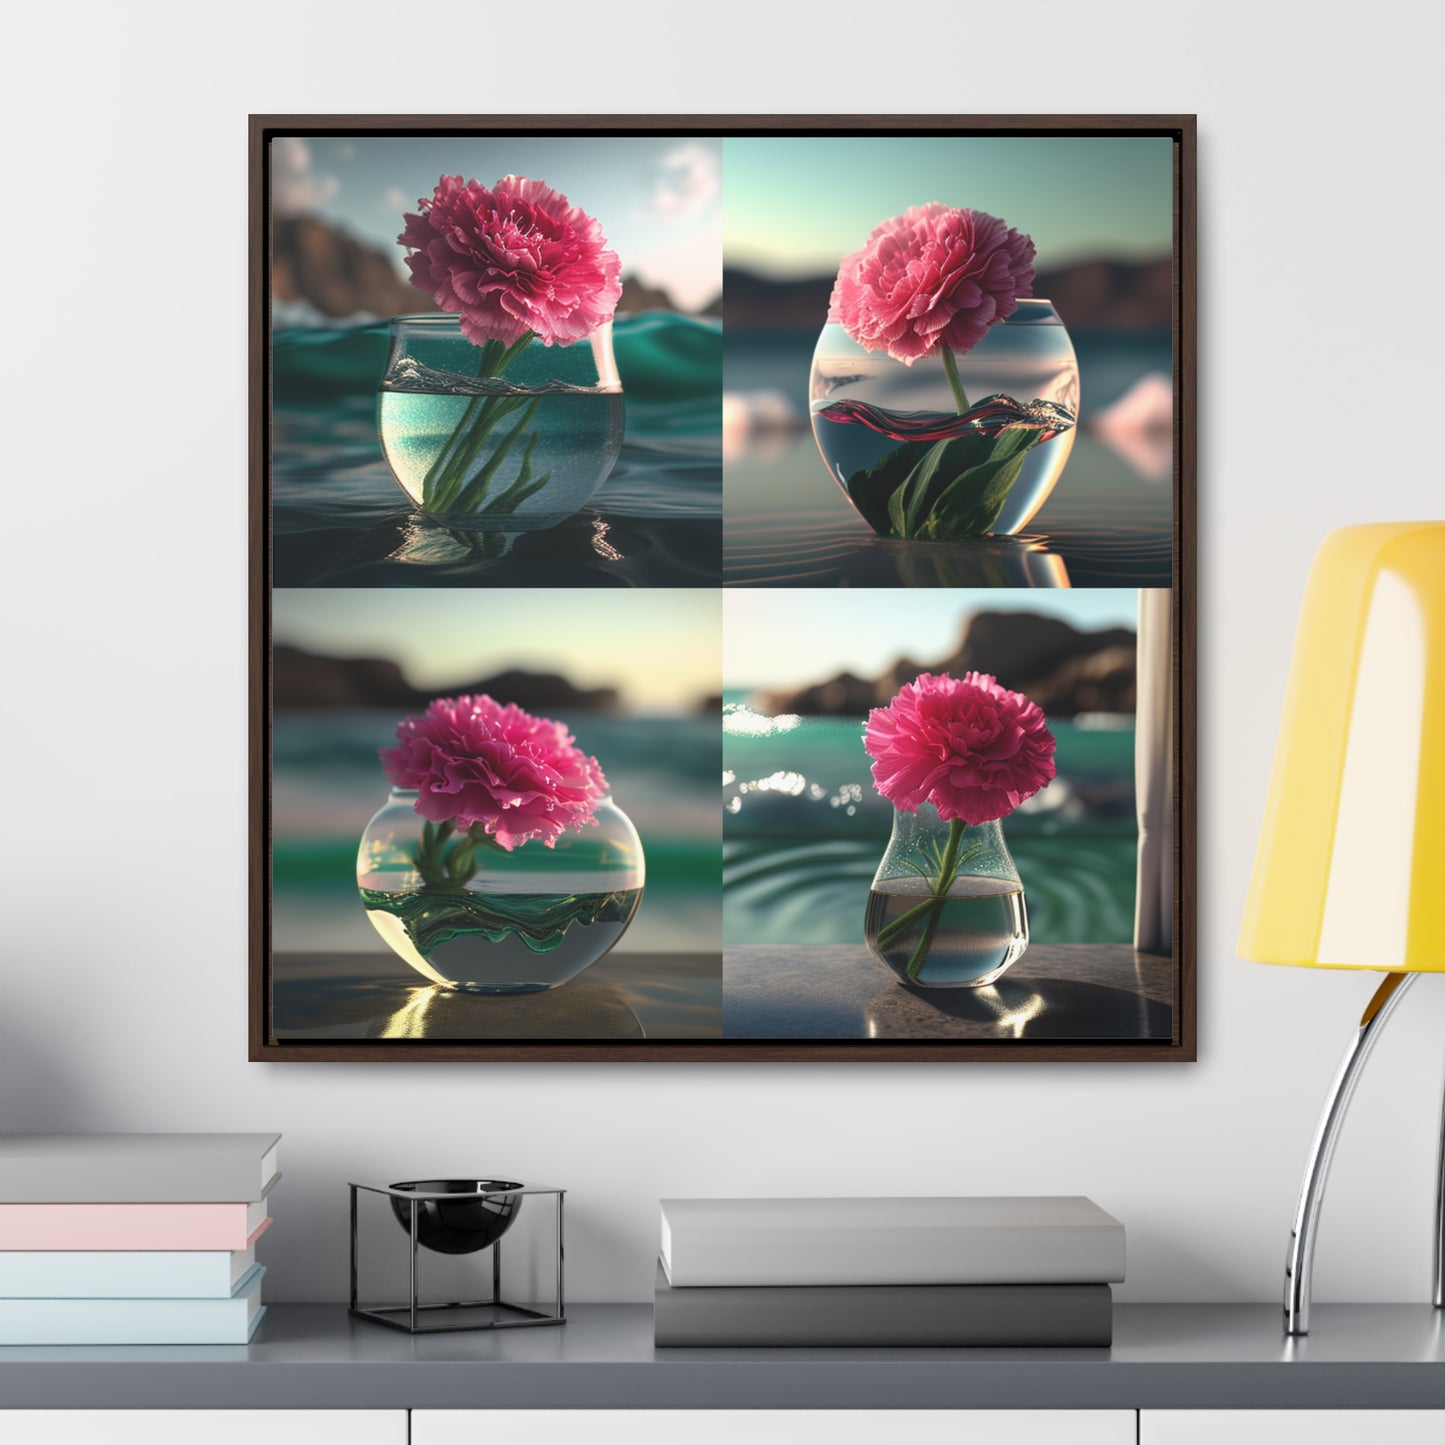 Gallery Canvas Wraps, Square Frame Carnation 5